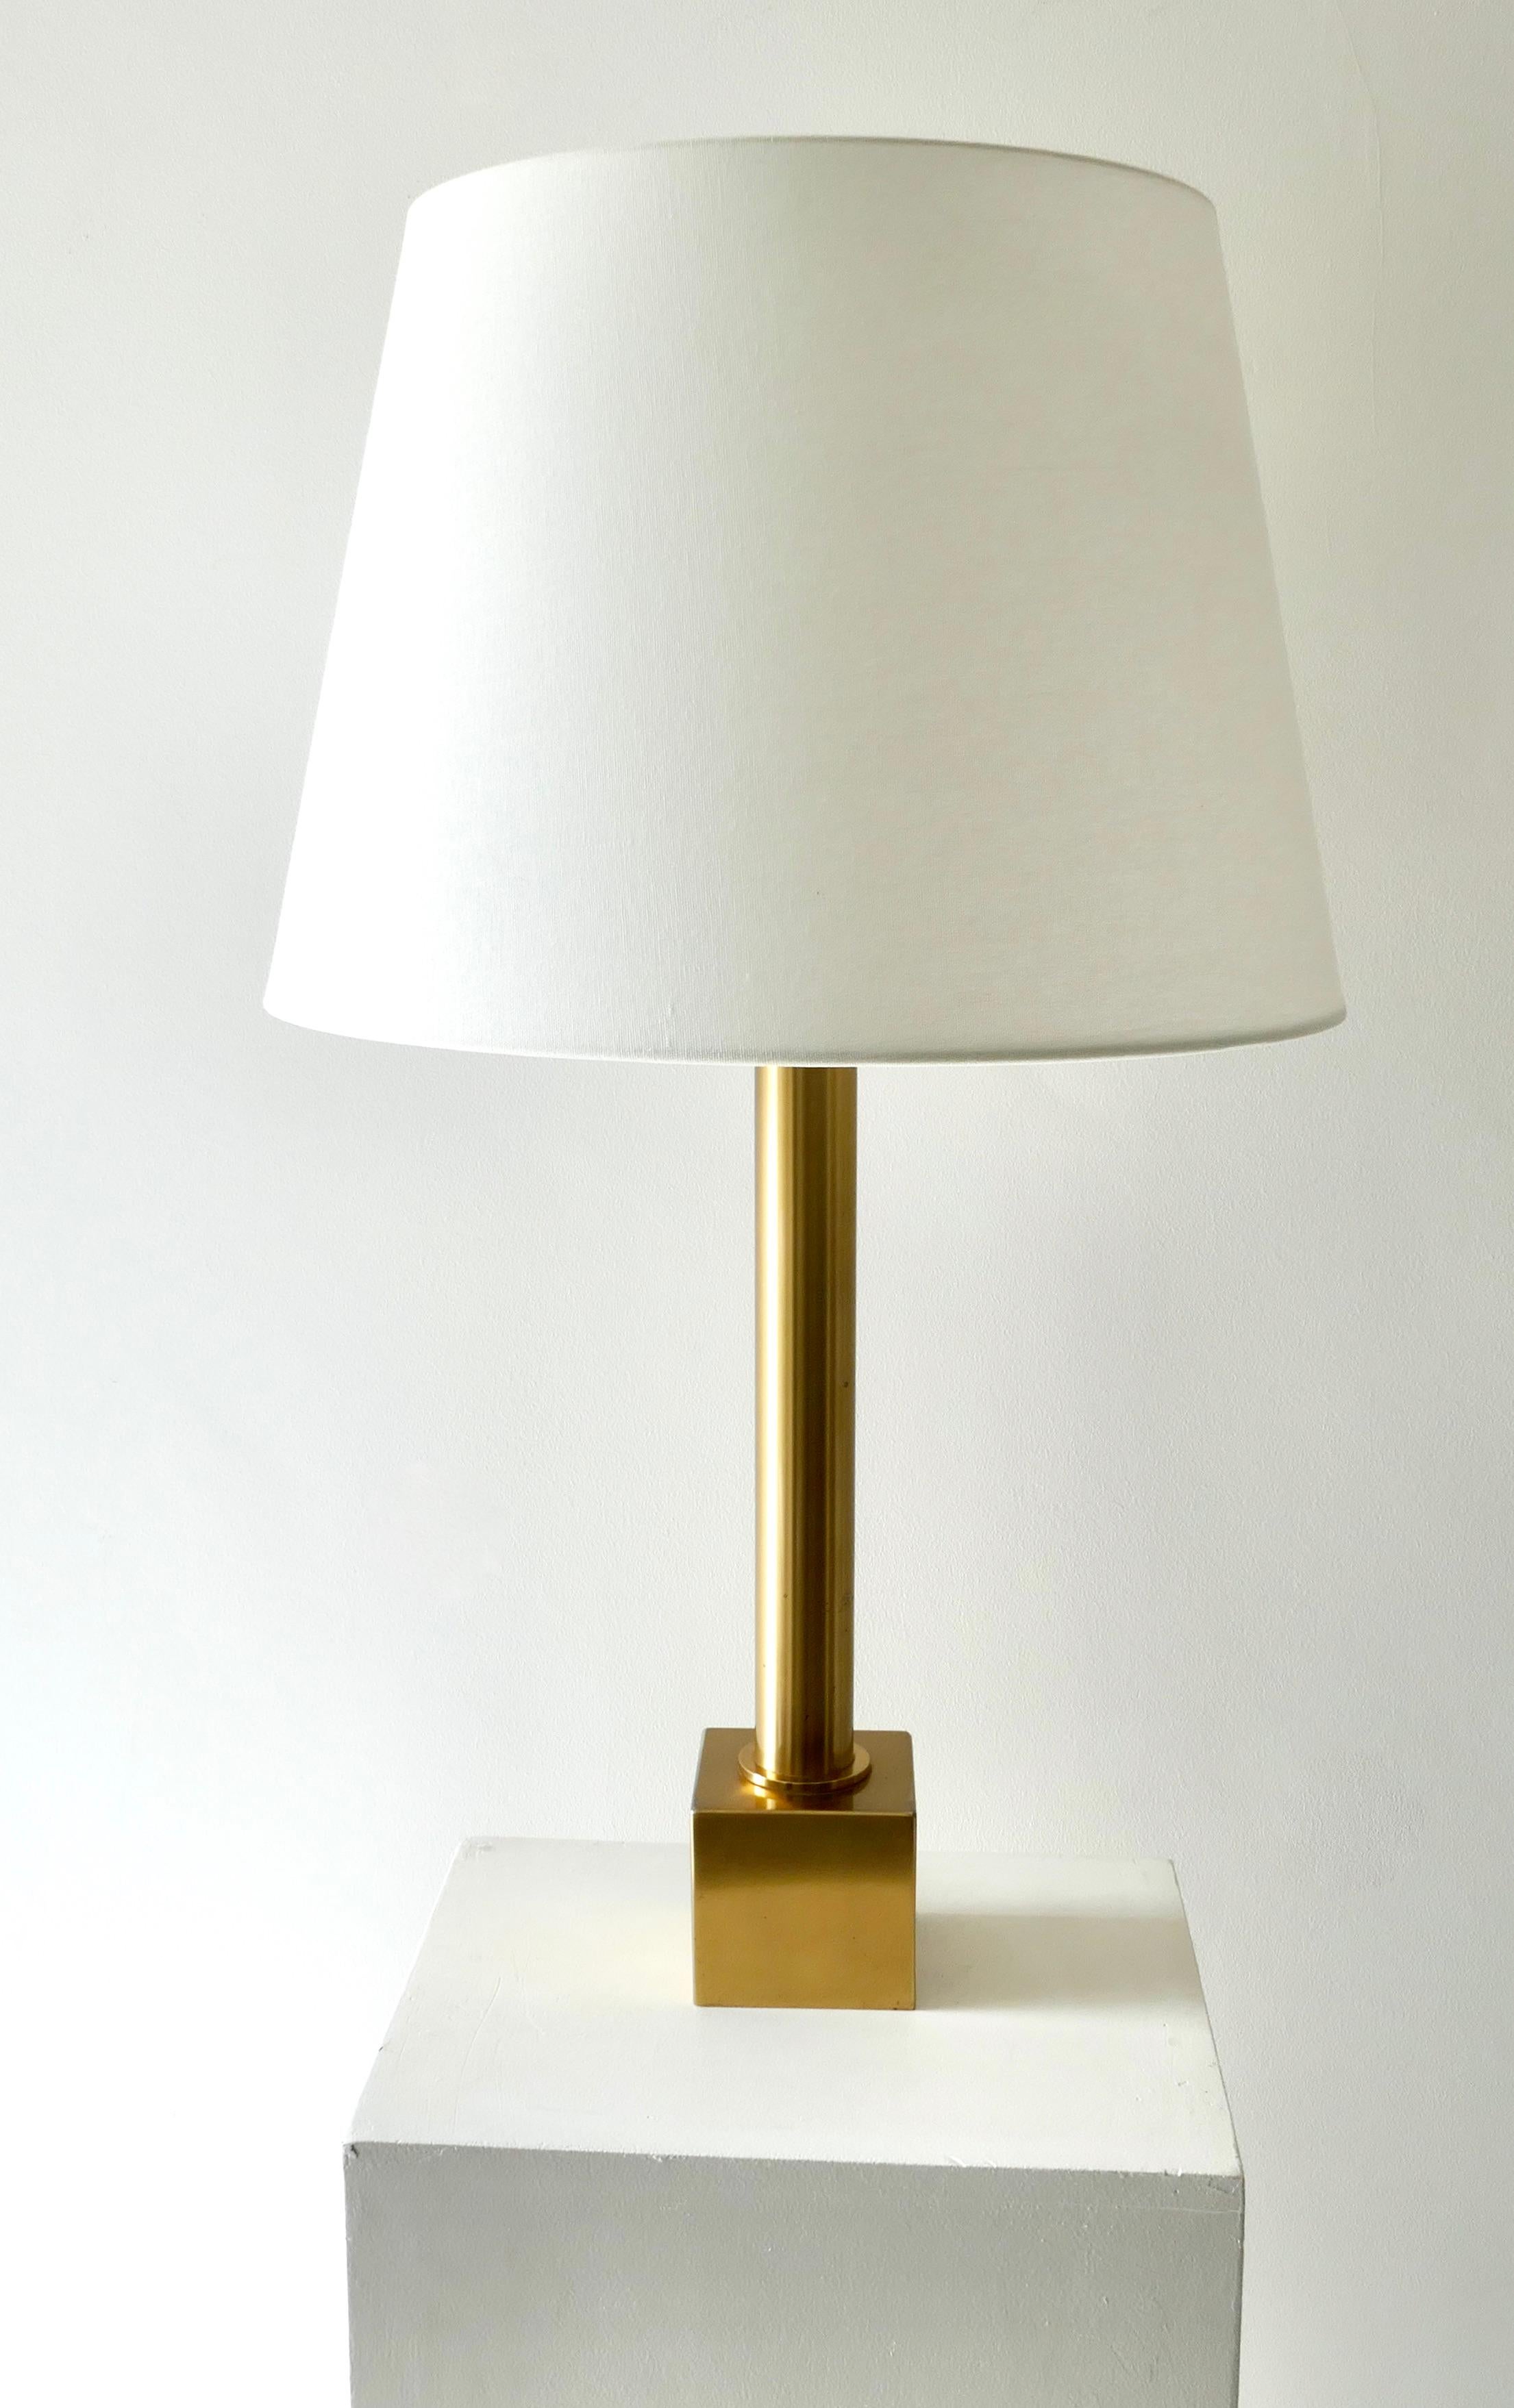 Large solid brass table lamp with white lamp shade, Germany, 1970s.